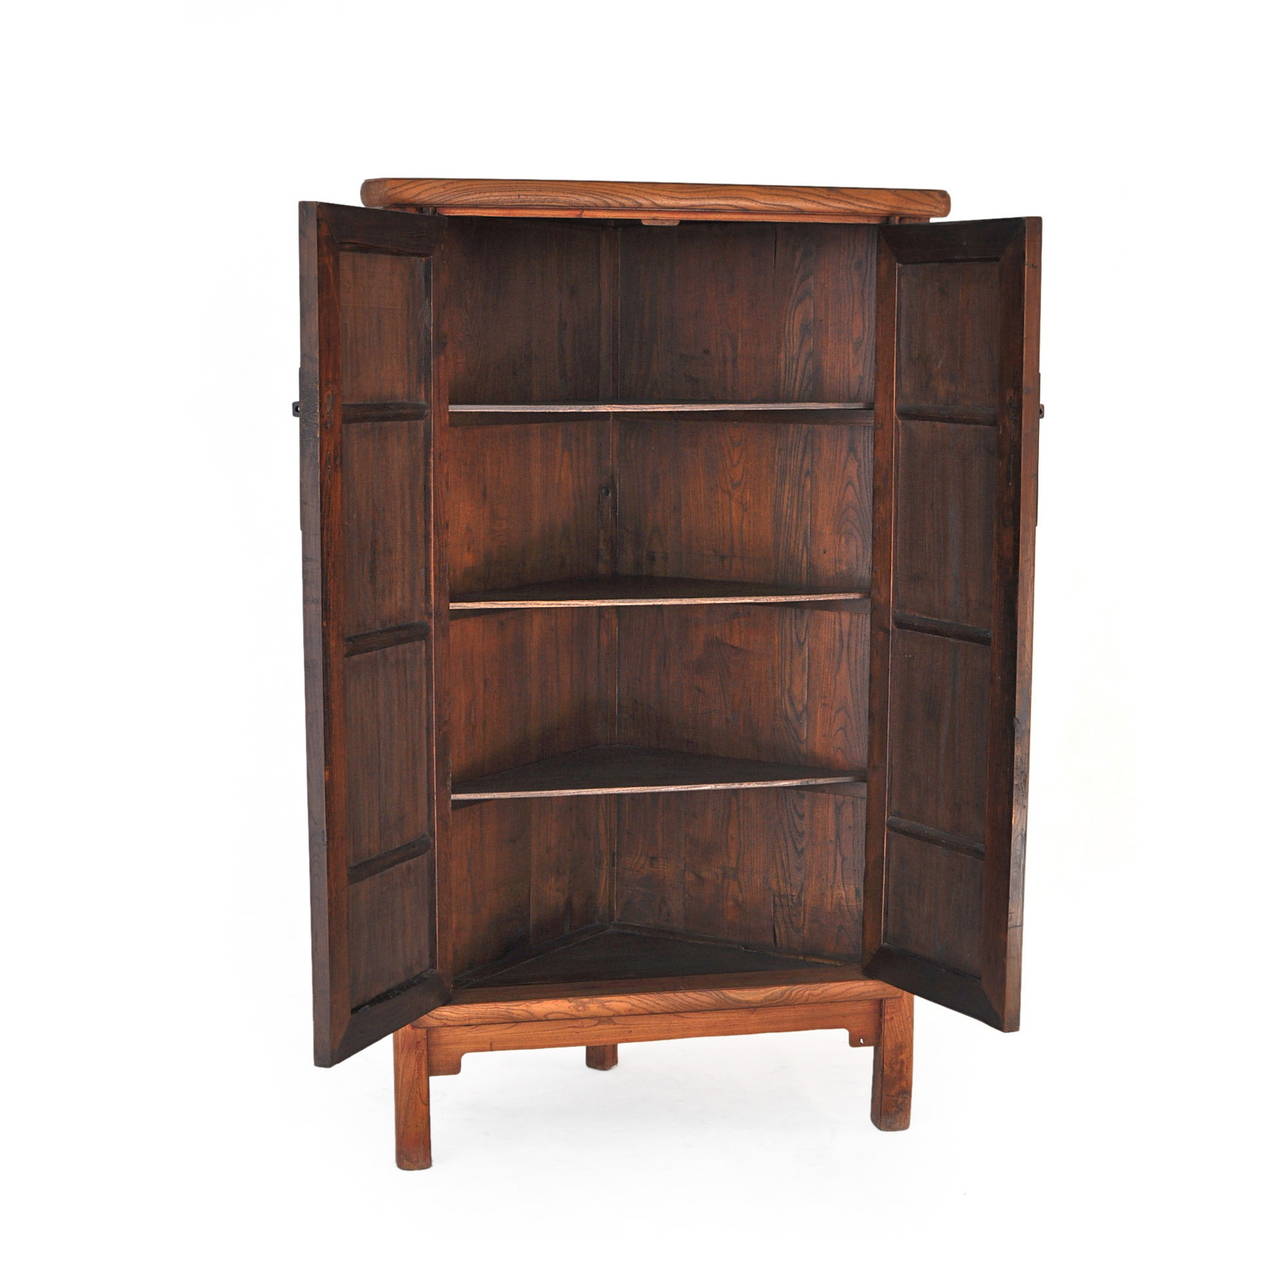 Rustic Corner Cabinet In Excellent Condition For Sale In Washington, DC